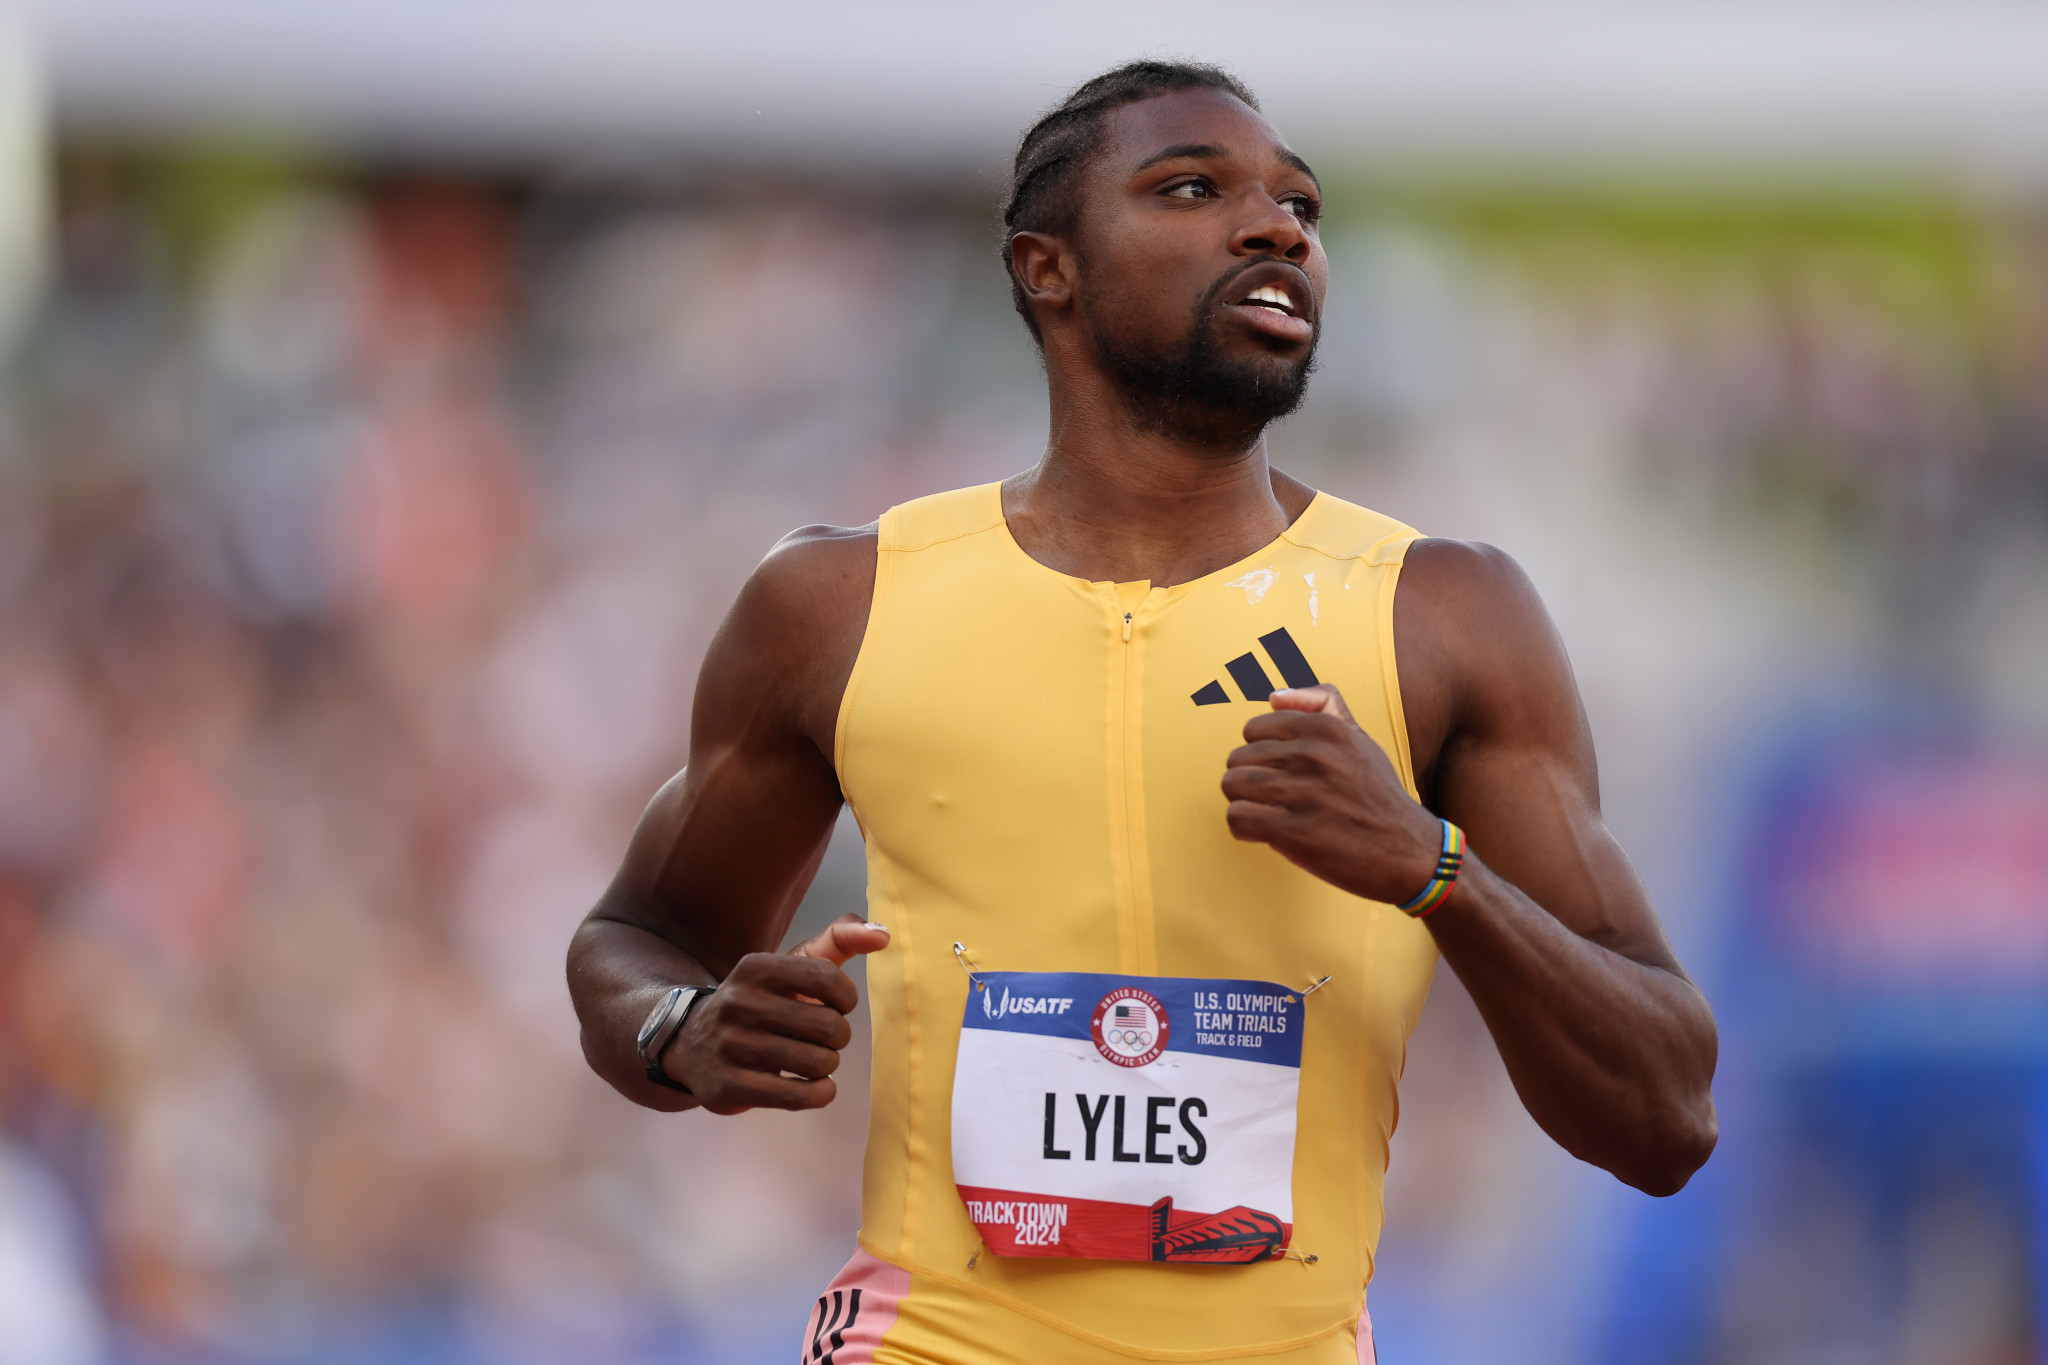 Noah Lyles is king of the track and eyeing glory. GETTY IMAGES